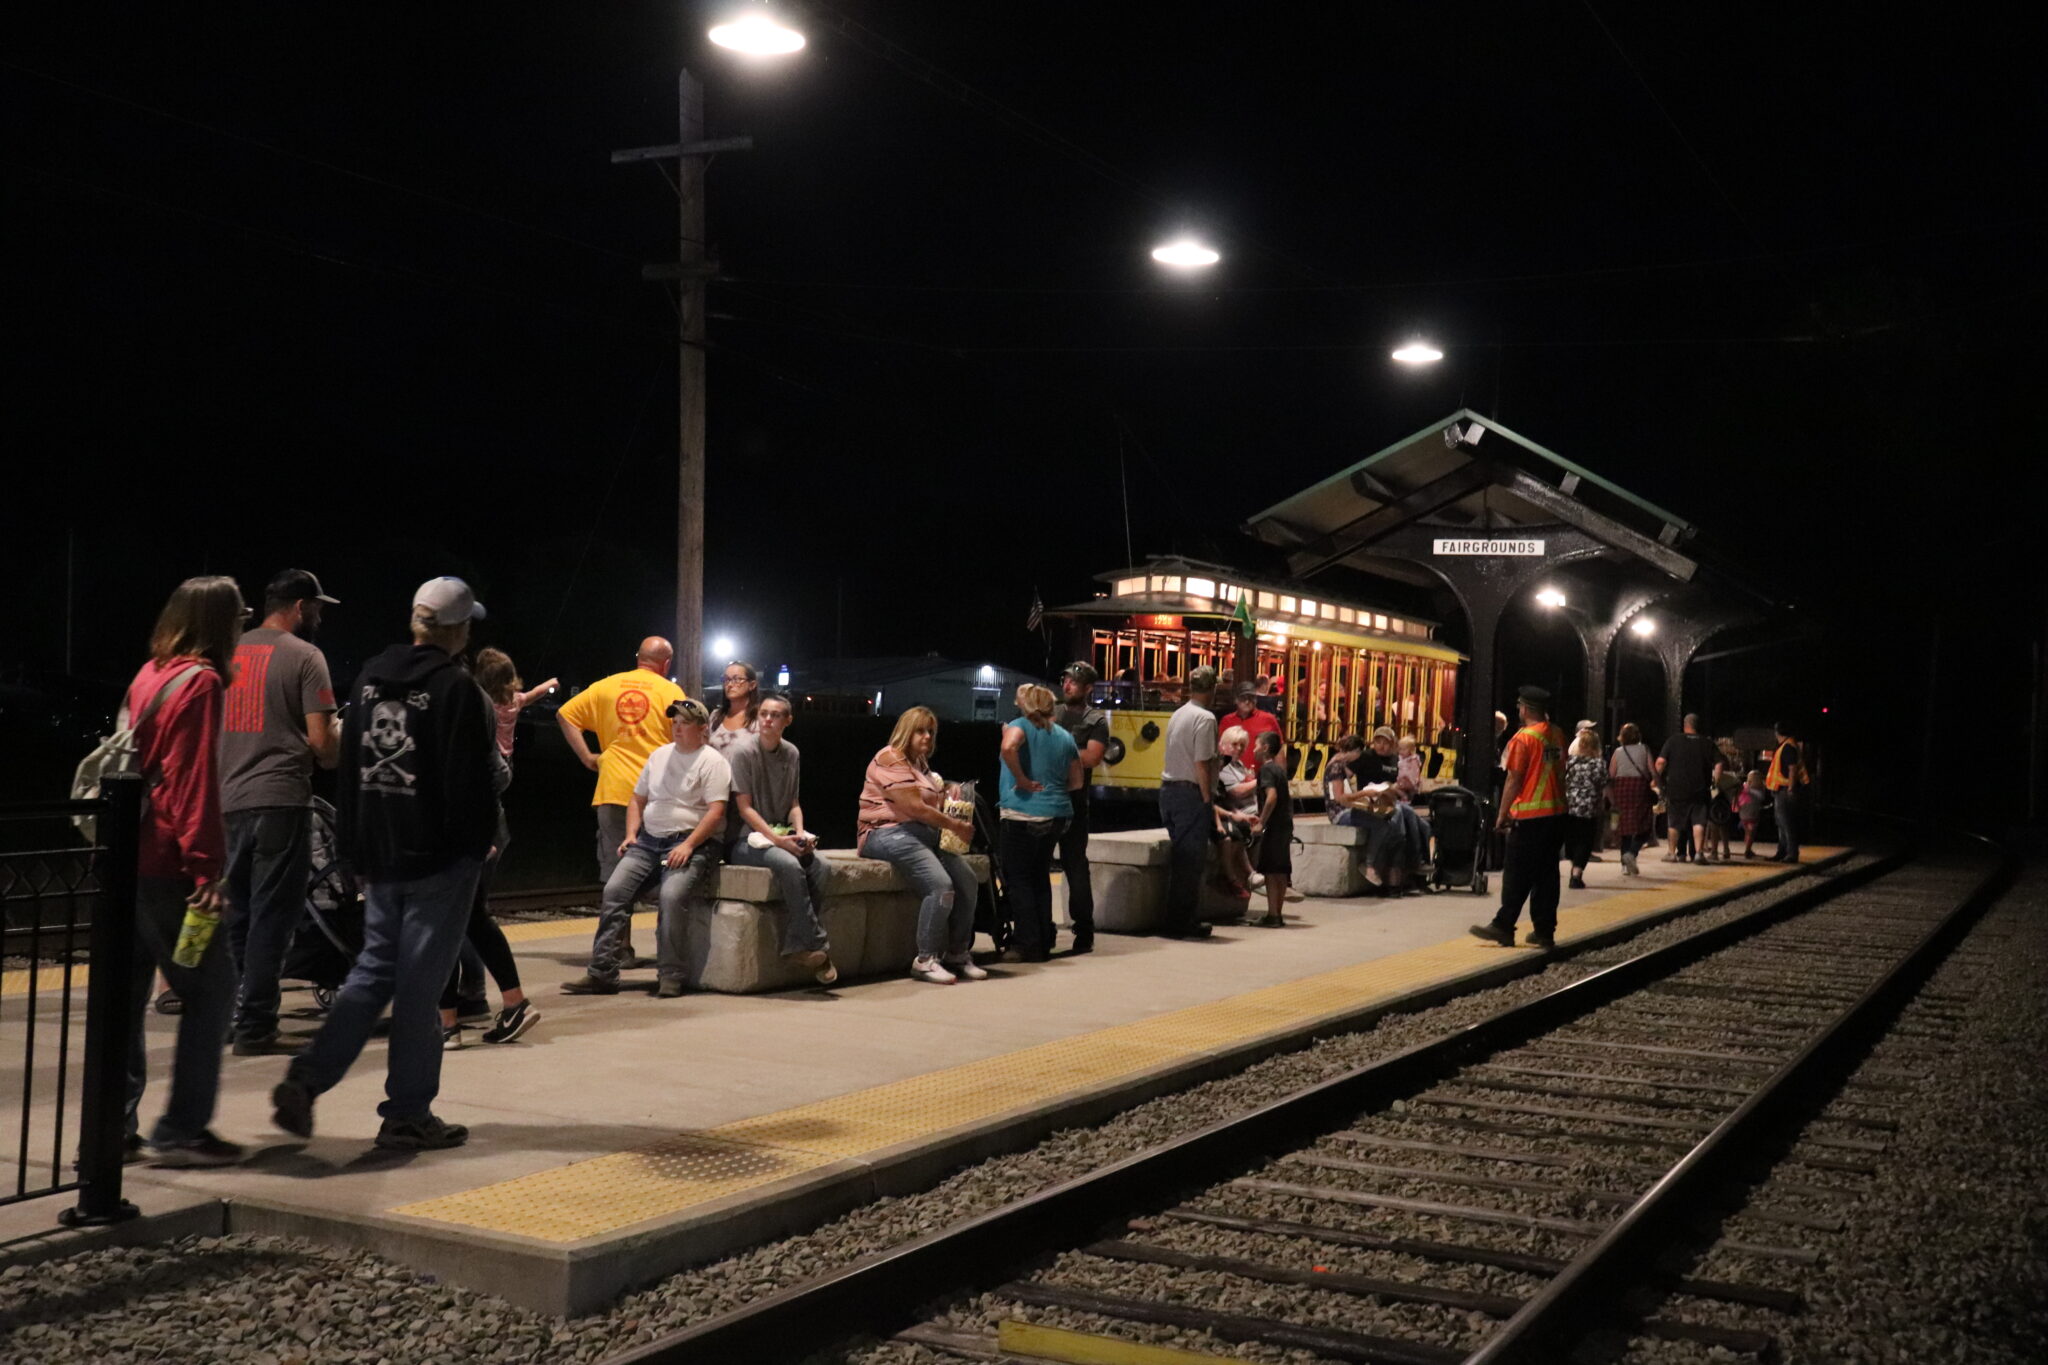 A large group of people wait to board the trolley at the Fairgrounds platform at night. The platform lights illuminate the scene as the open car stops at the far side (in the background of the image).